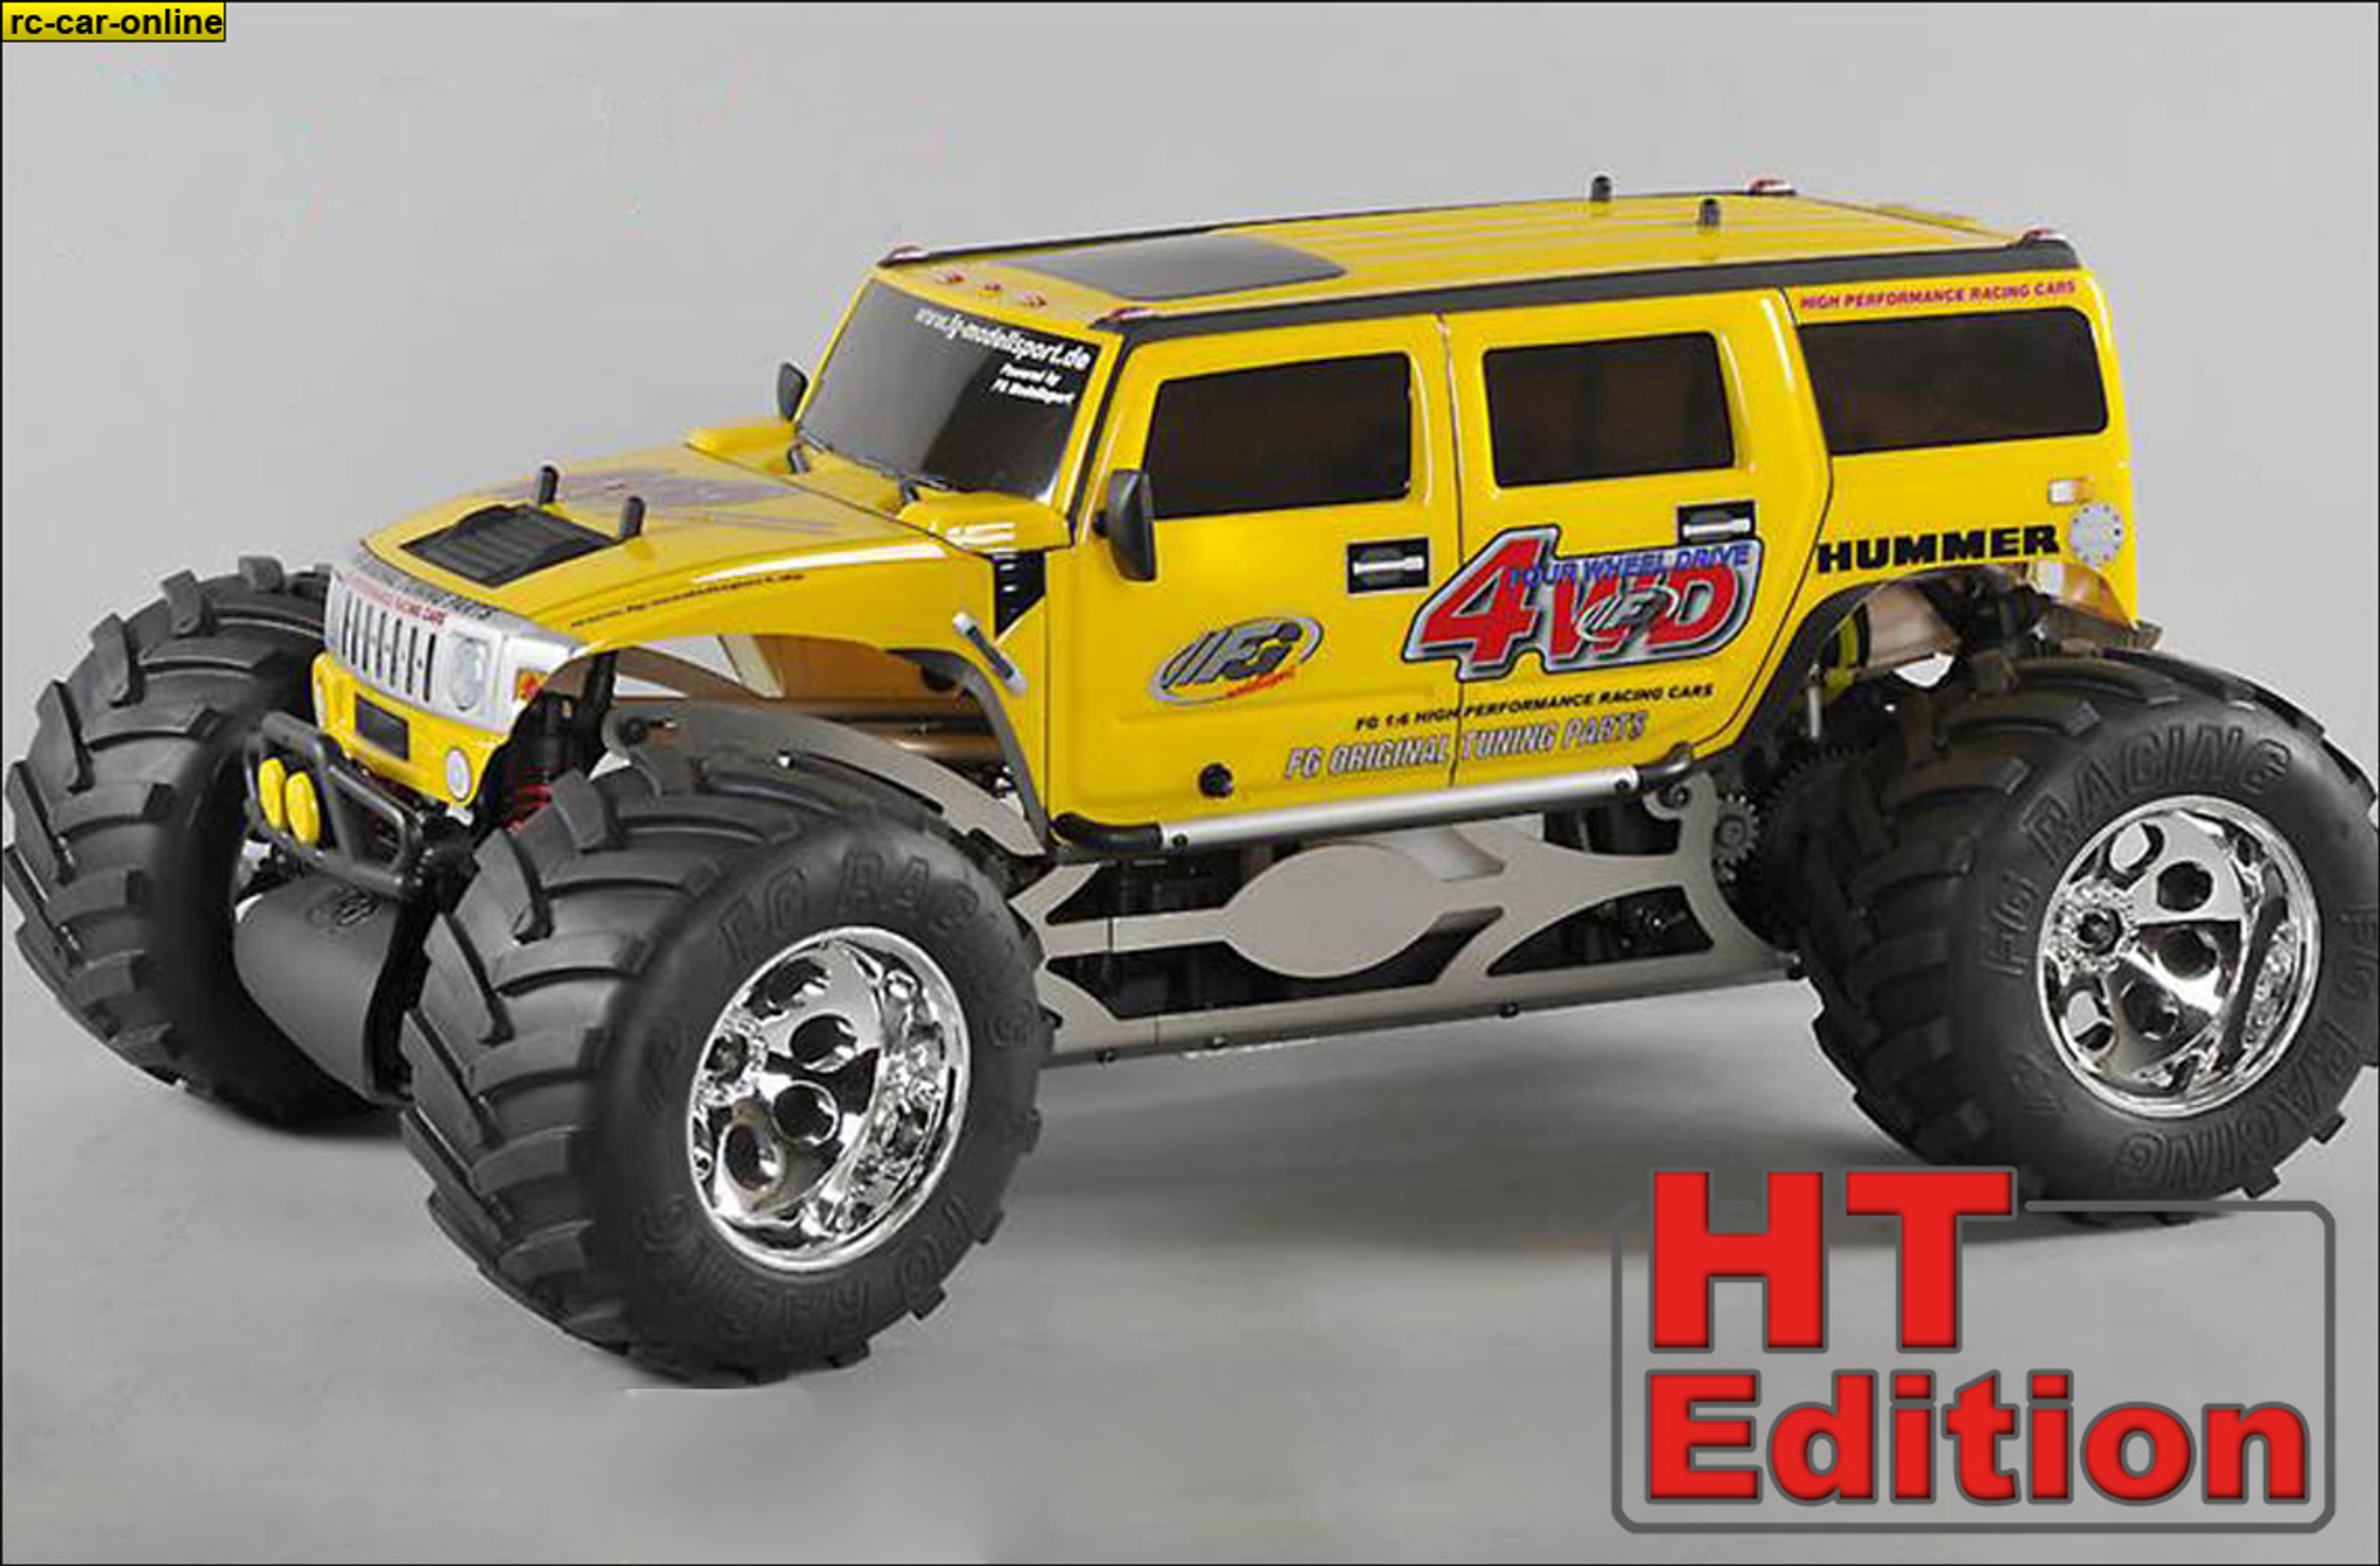 FG Monster Hummer WB535 4WD HT-Edition with yellow Body Shell